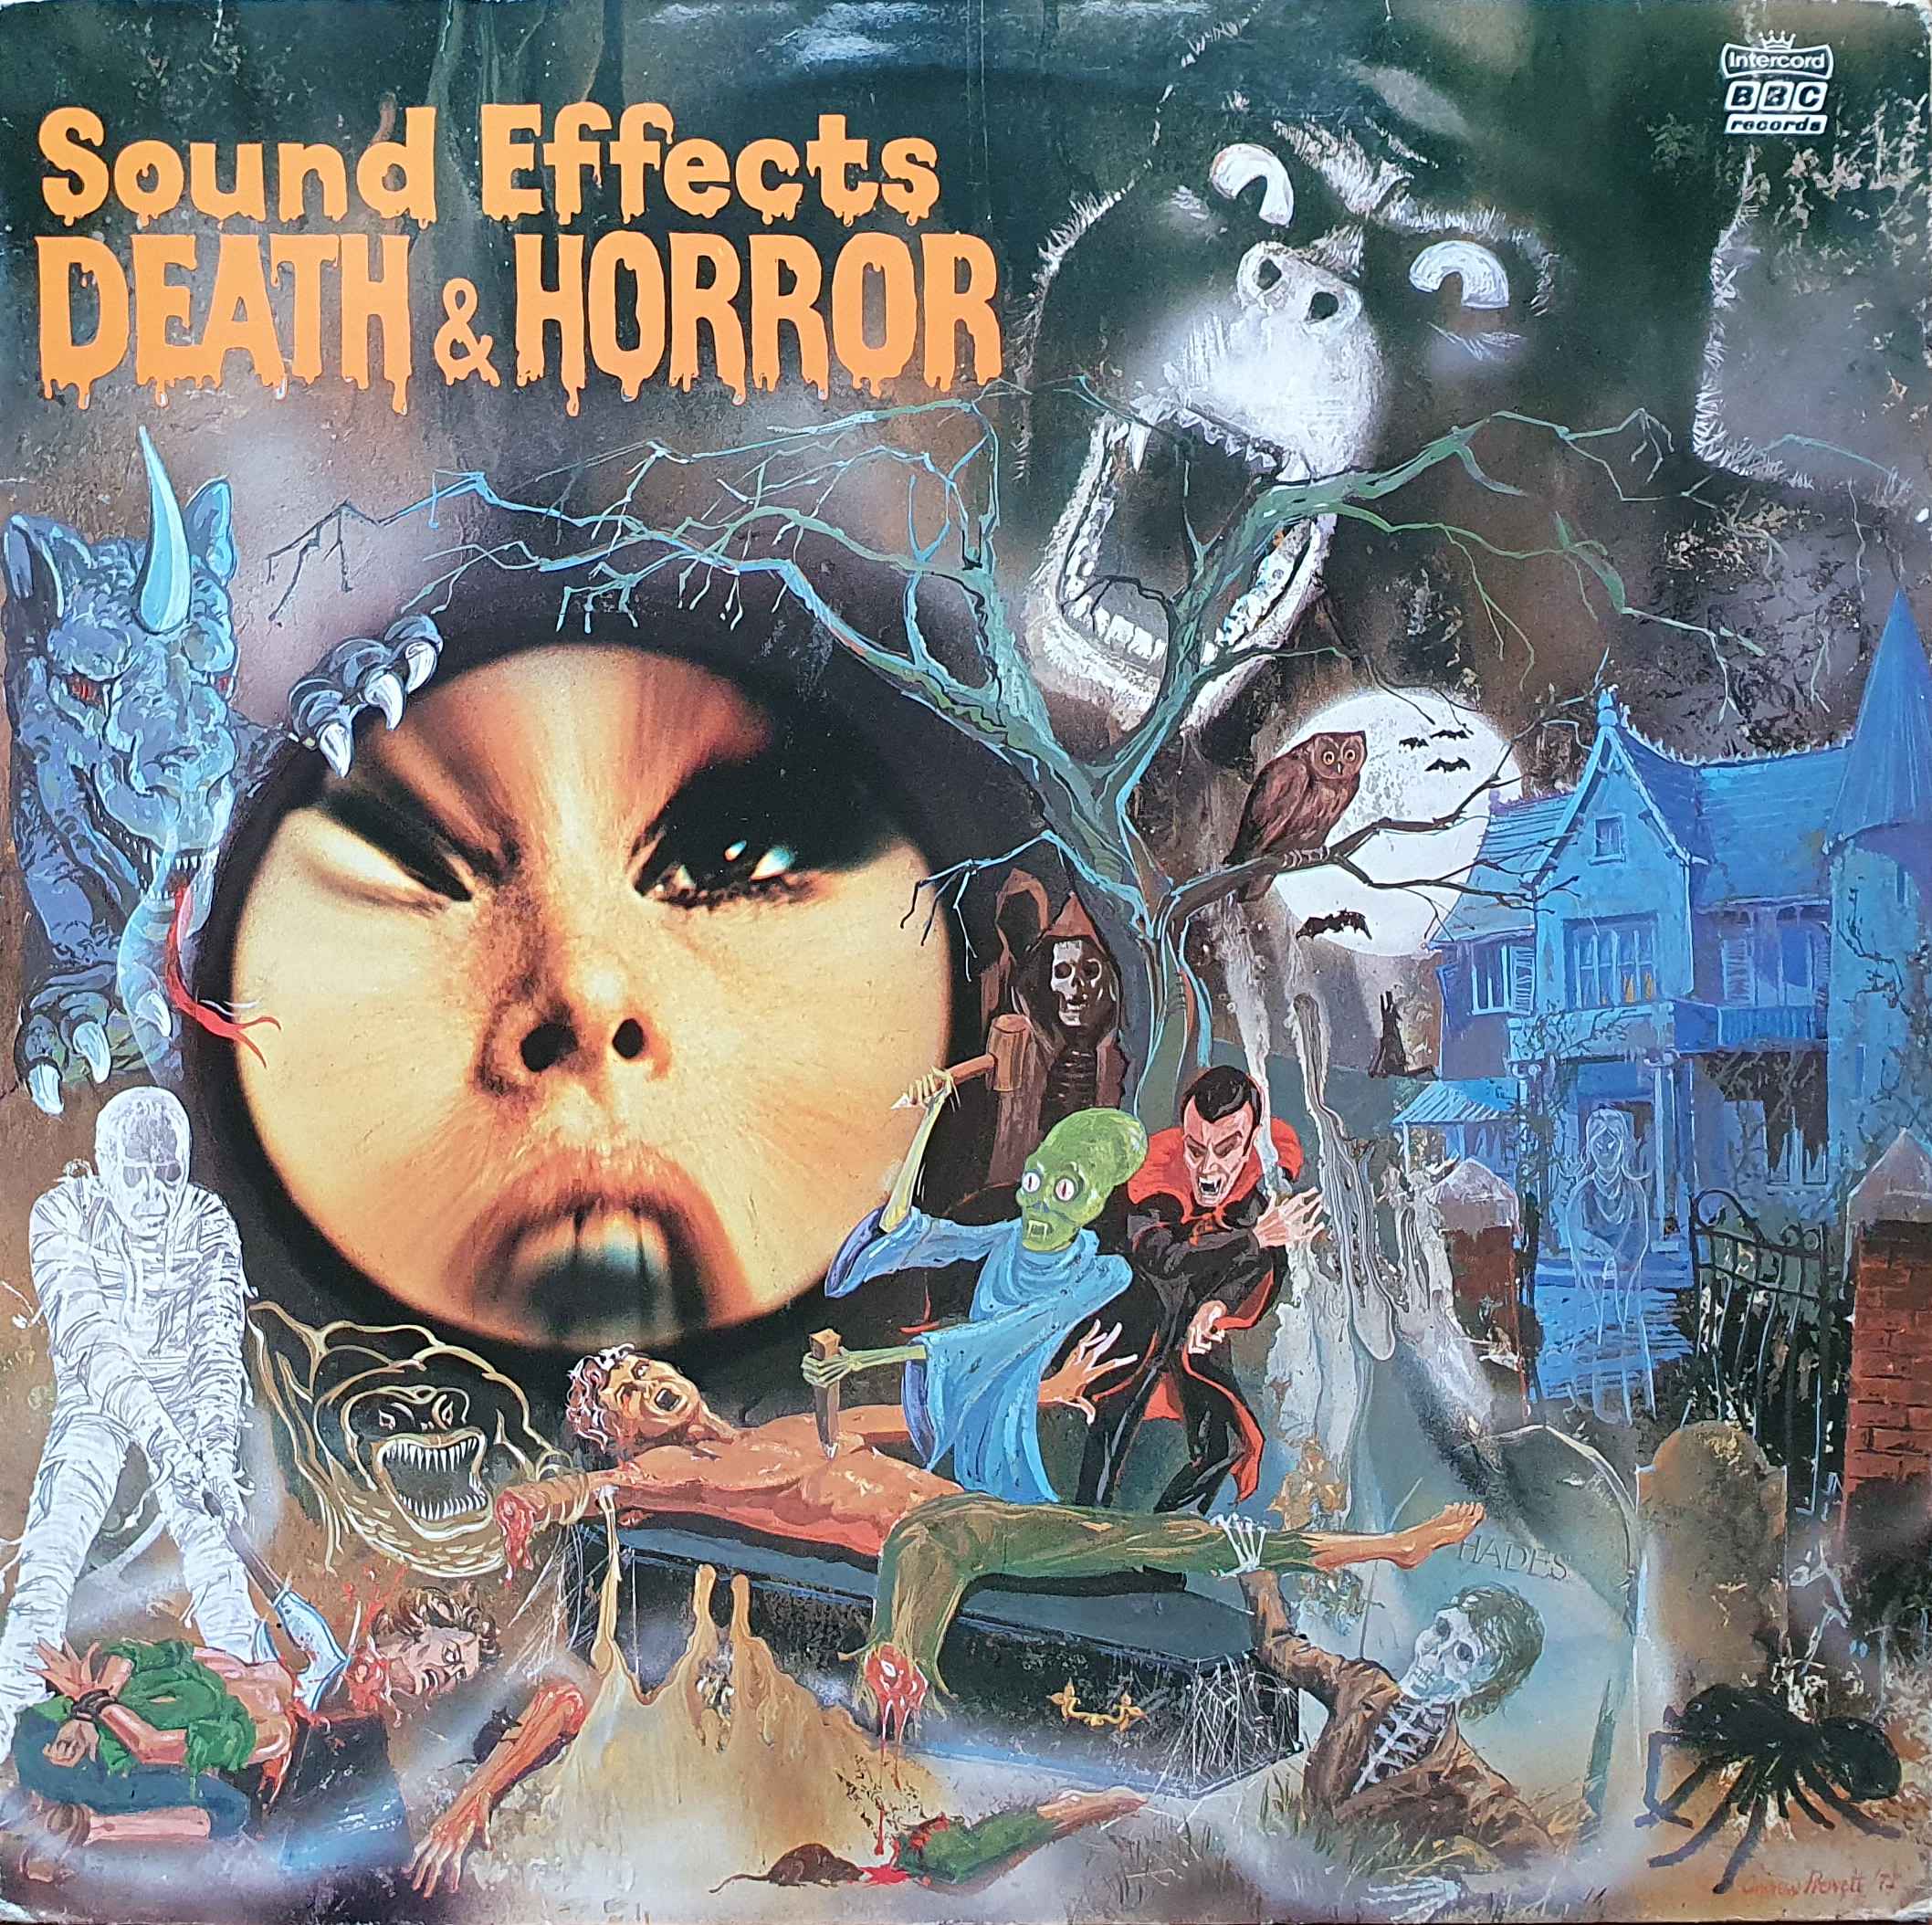 Picture of INT 128.001 Death and horror sound effects by artist Mike Harding from the BBC albums - Records and Tapes library